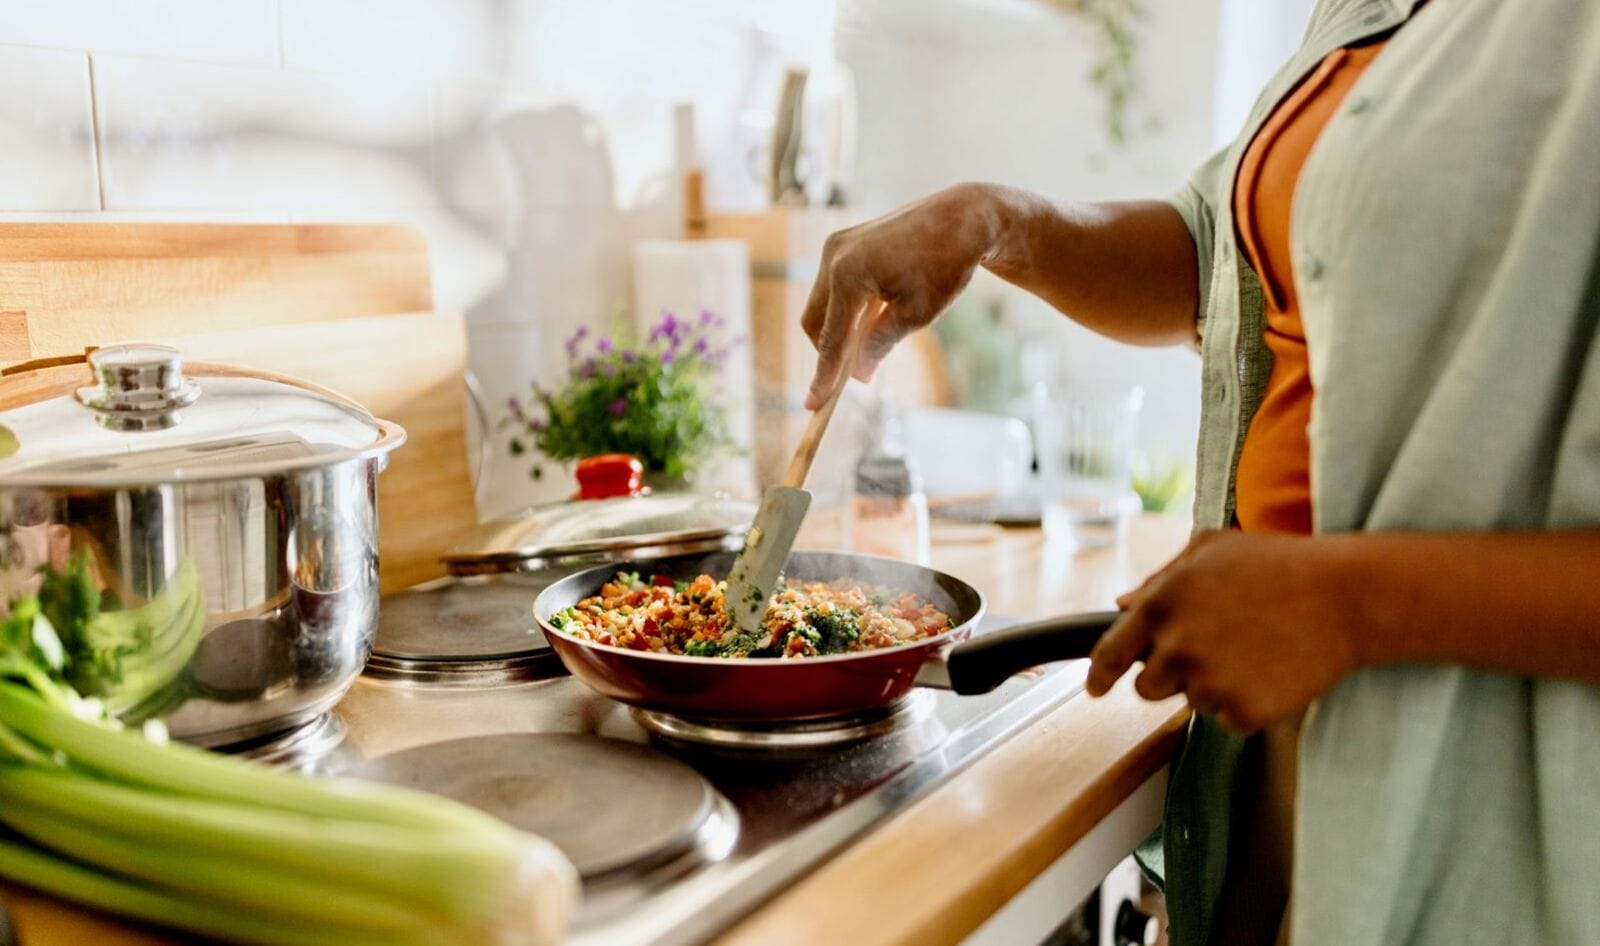 More Black Americans Are Going Vegan—2 New Health Studies Suggest Why.